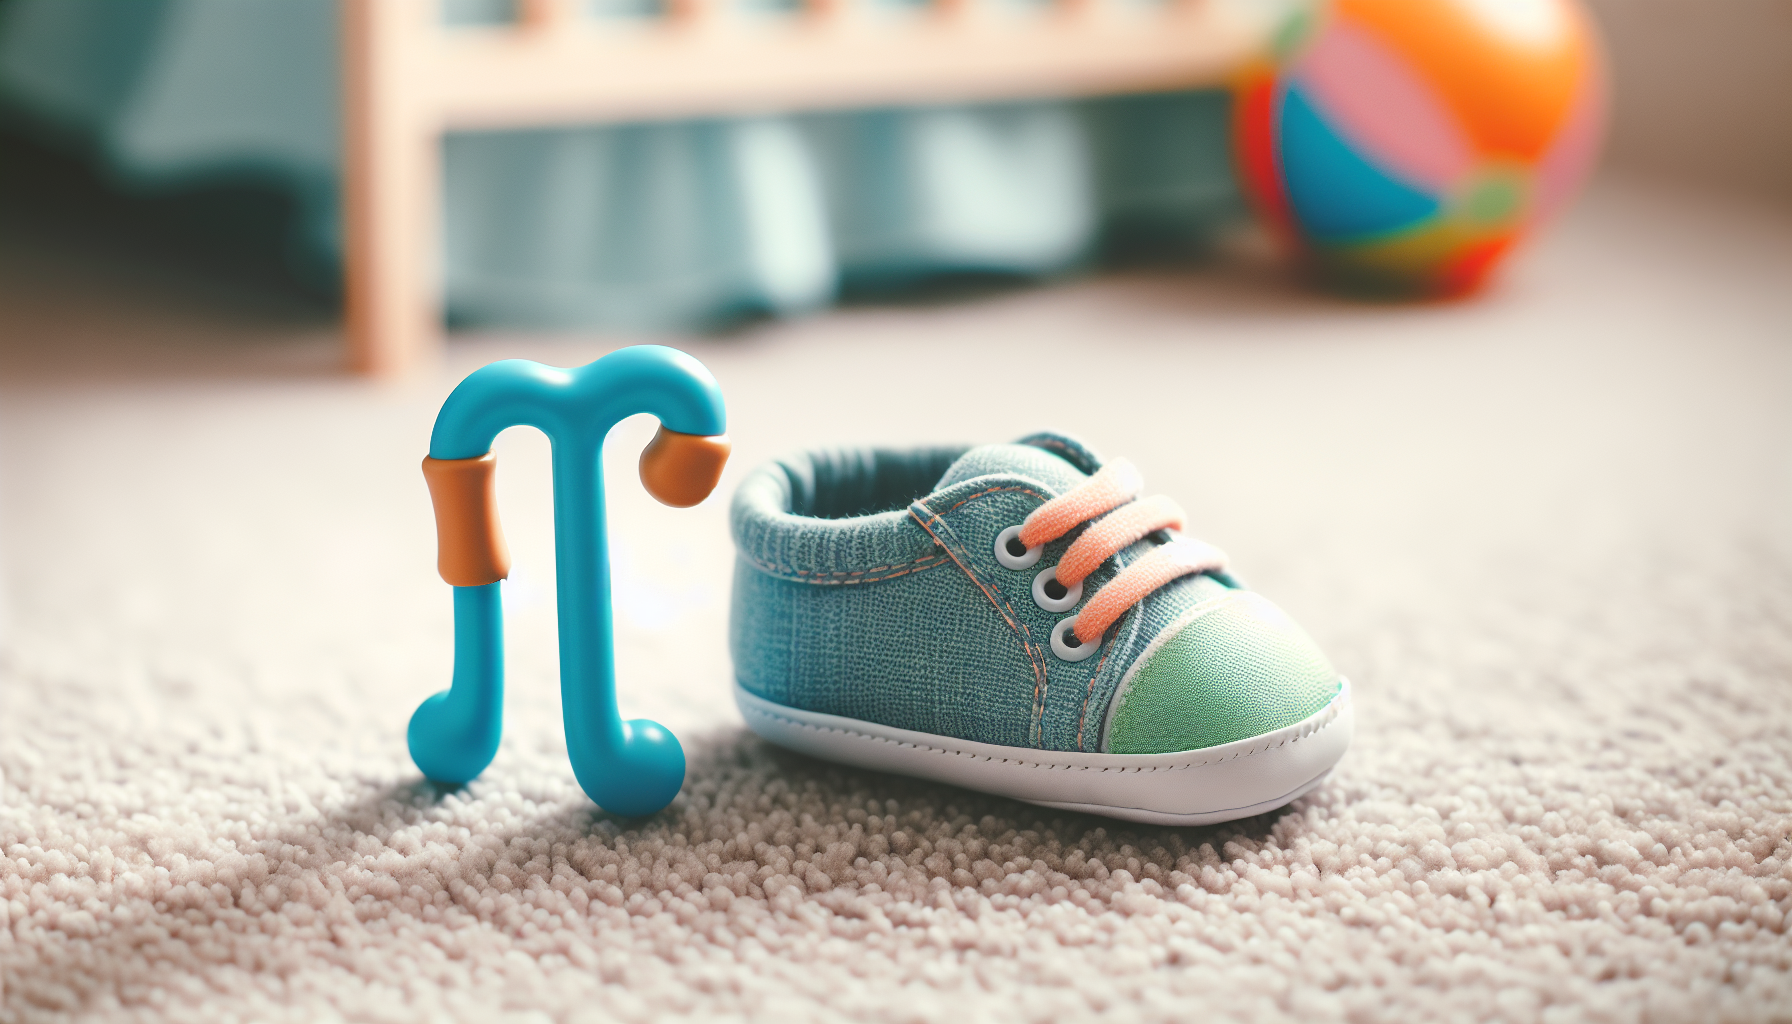 What Is The Best Way To Get A Baby To Start Walking?